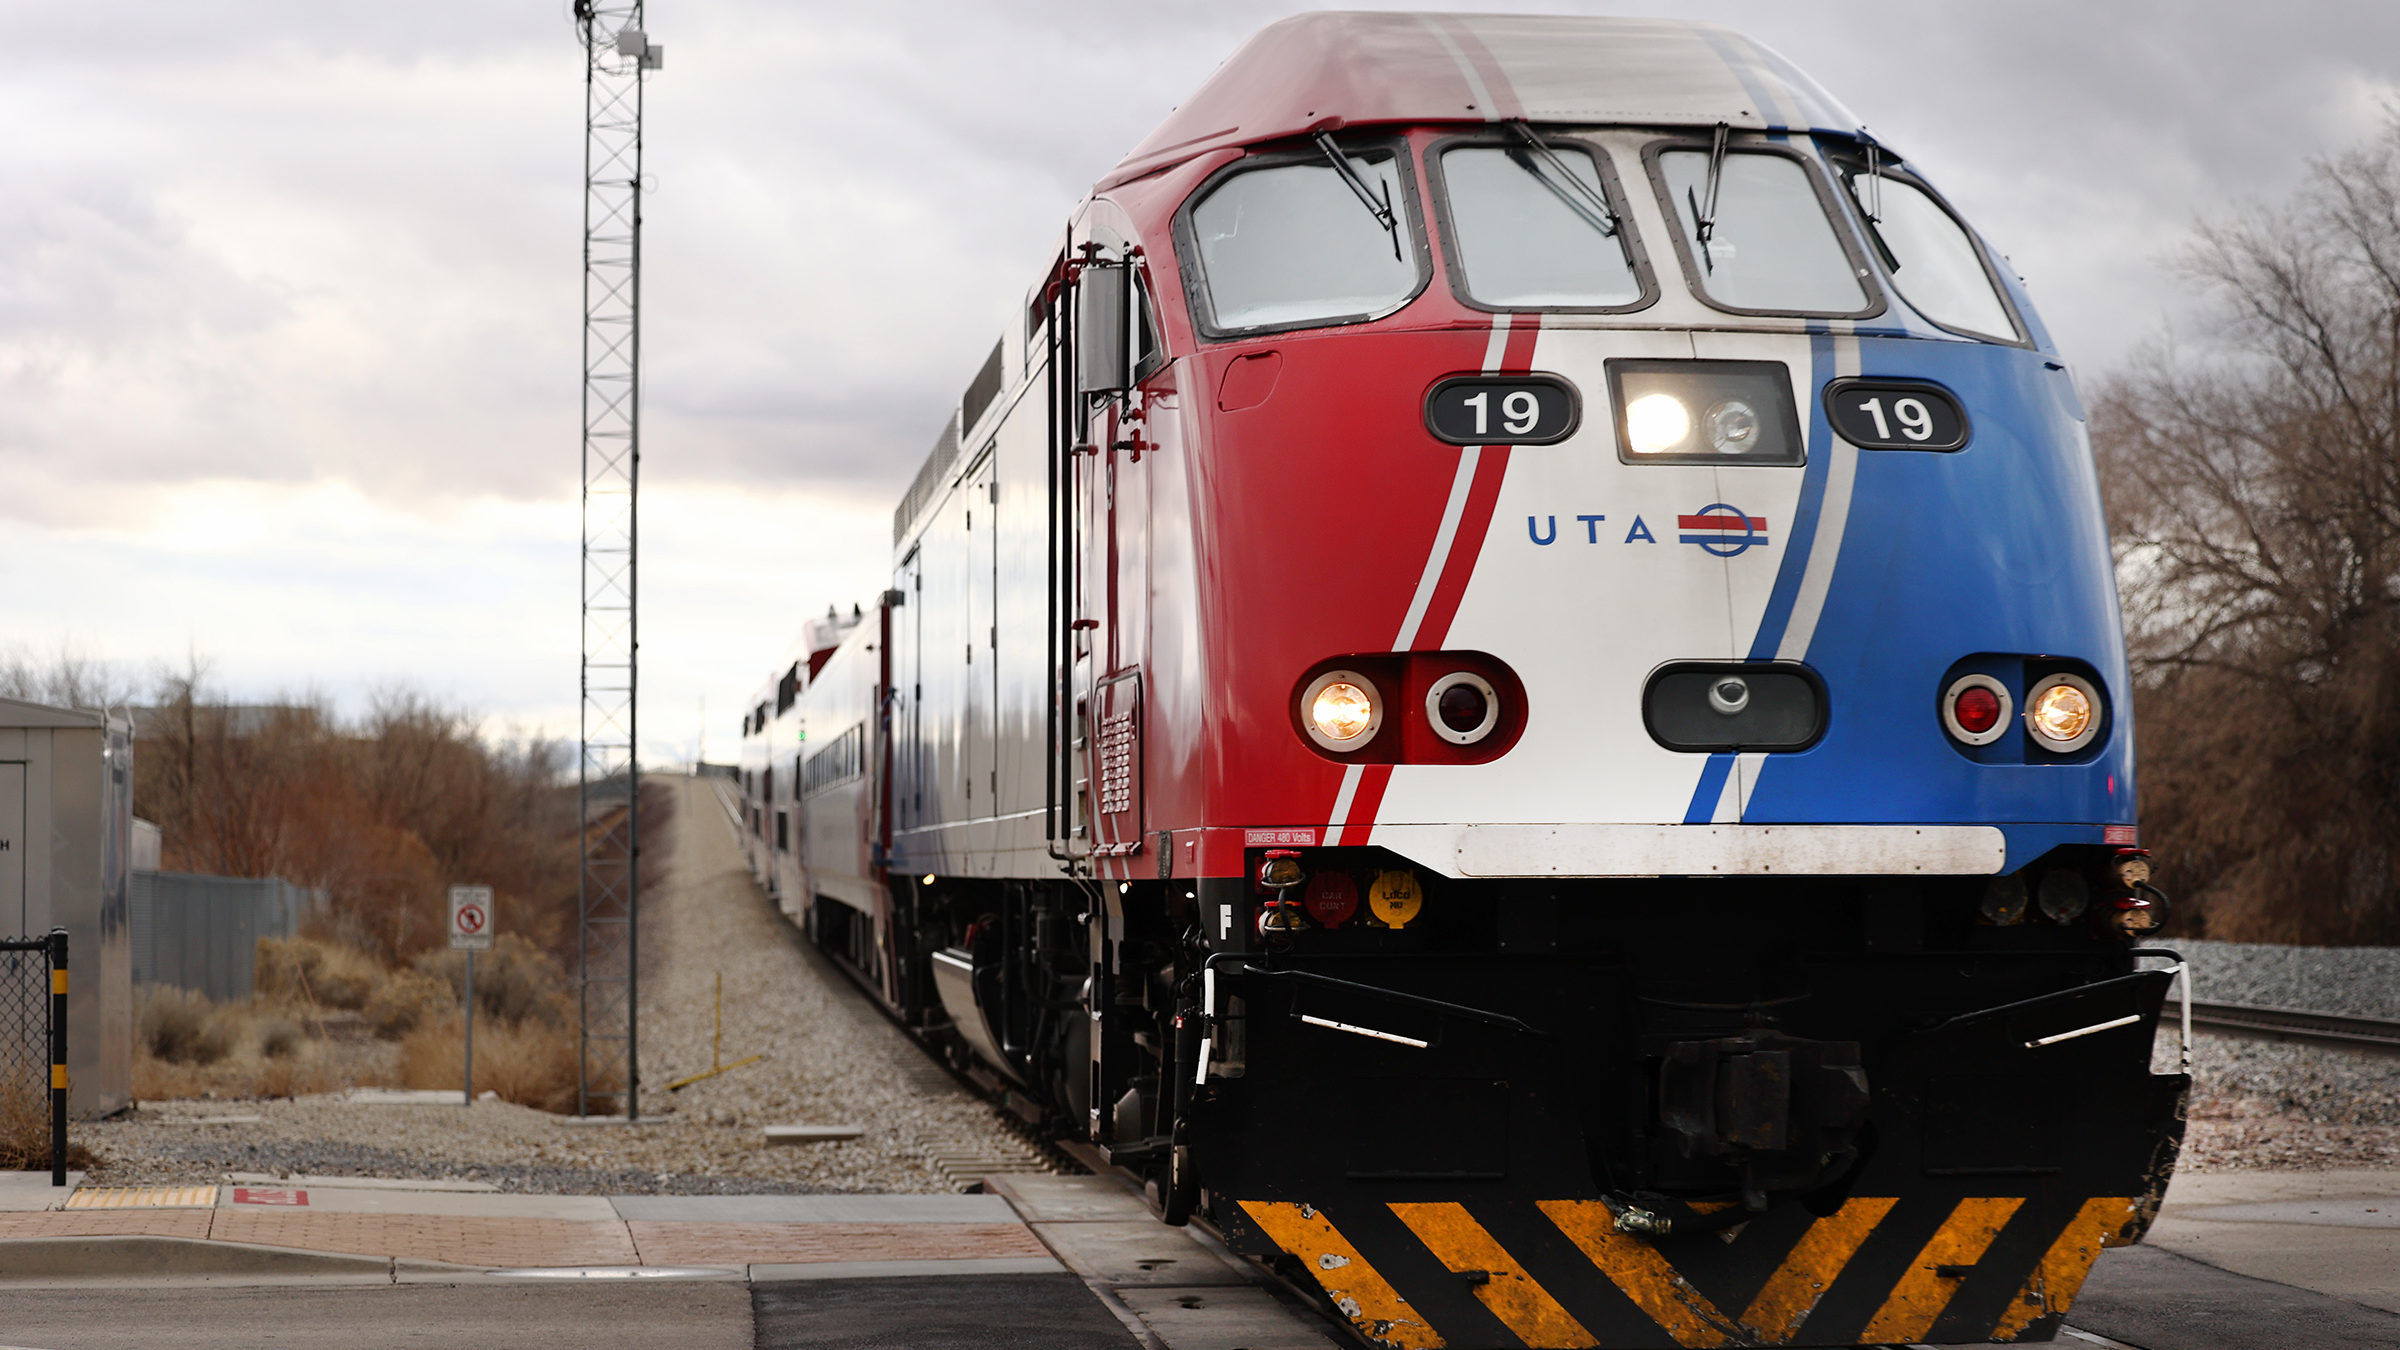 UTA Frontrunner commuter rail. UTA Plans to address delays by updating cars and adding a new line t...